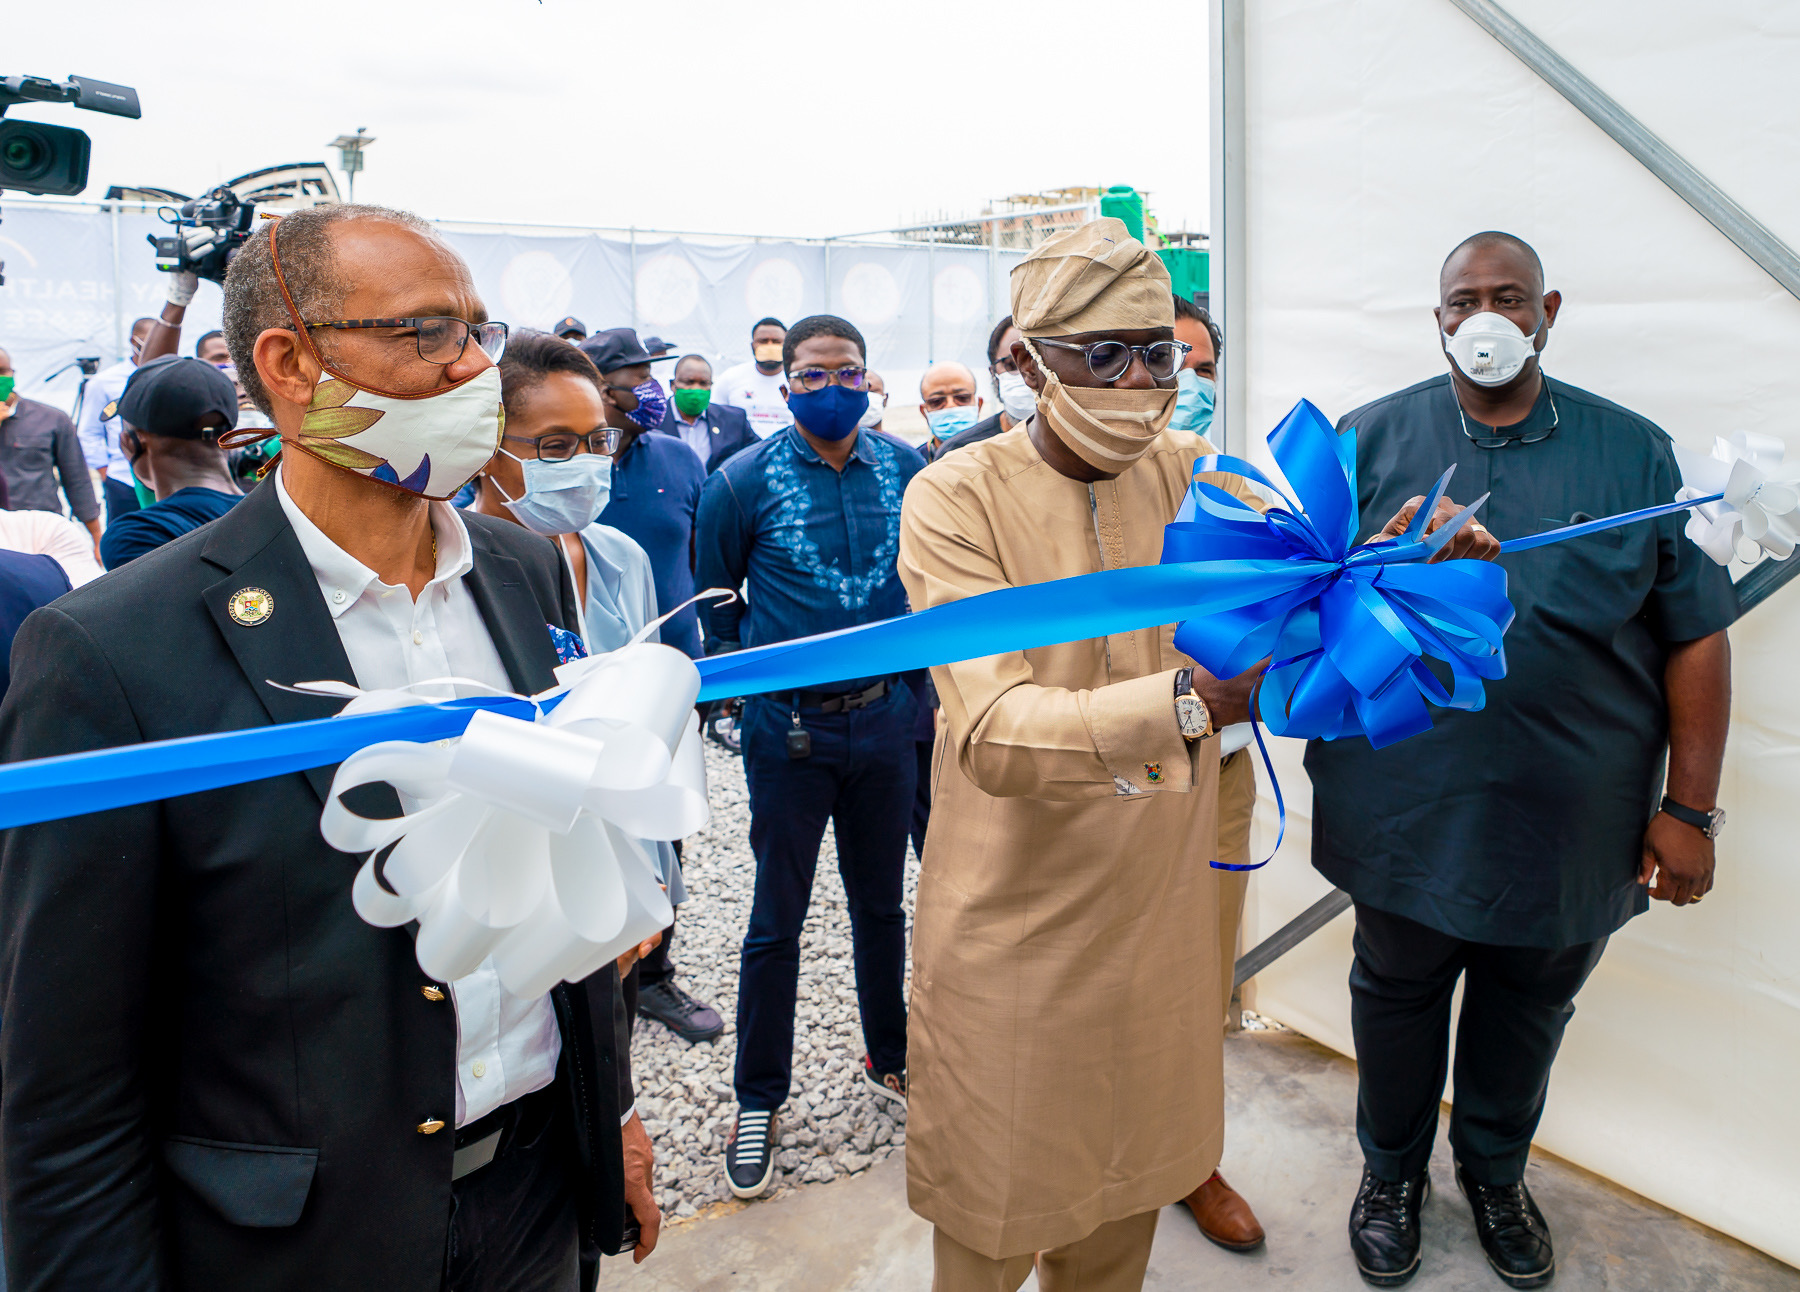 Lagos State Governor, Mr. Babajide Sanwo-Olu (middle), cutting the tape to unveil the 80-Bed Isolation Centre, with Ten Intensive Care Unit facility, Four Ventilators for COVID-19 treatment, at Landmark Convention Centre, Oniru, on Wednesday, April 22, 2020. With him is the Commissioner for Health, Prof. Akin Abayomi (left) and others.